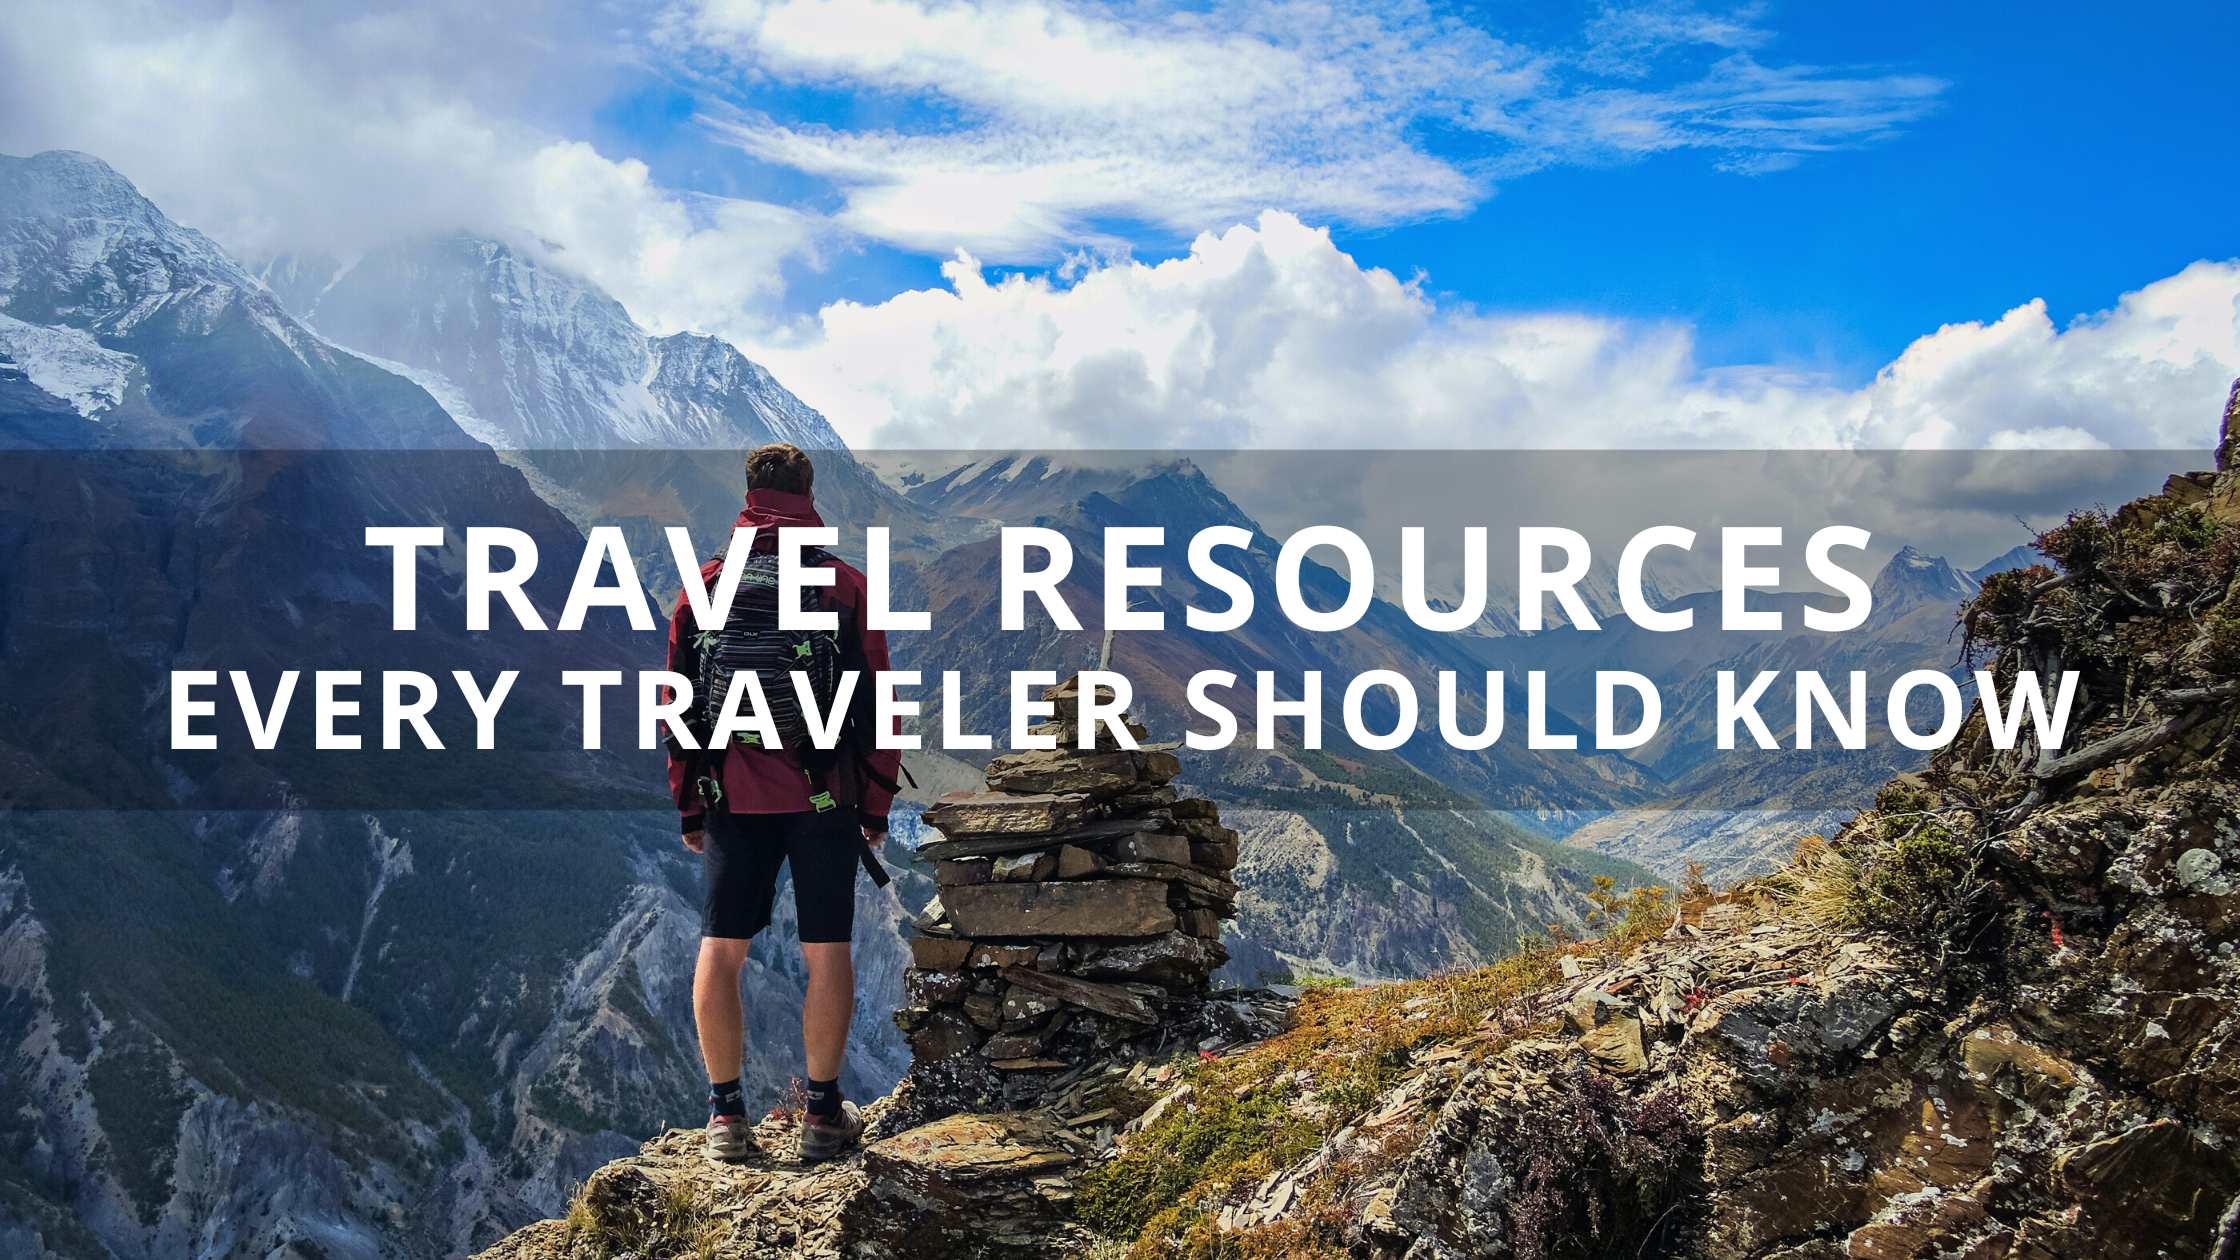 Travel Resources Every Traveler Should Know